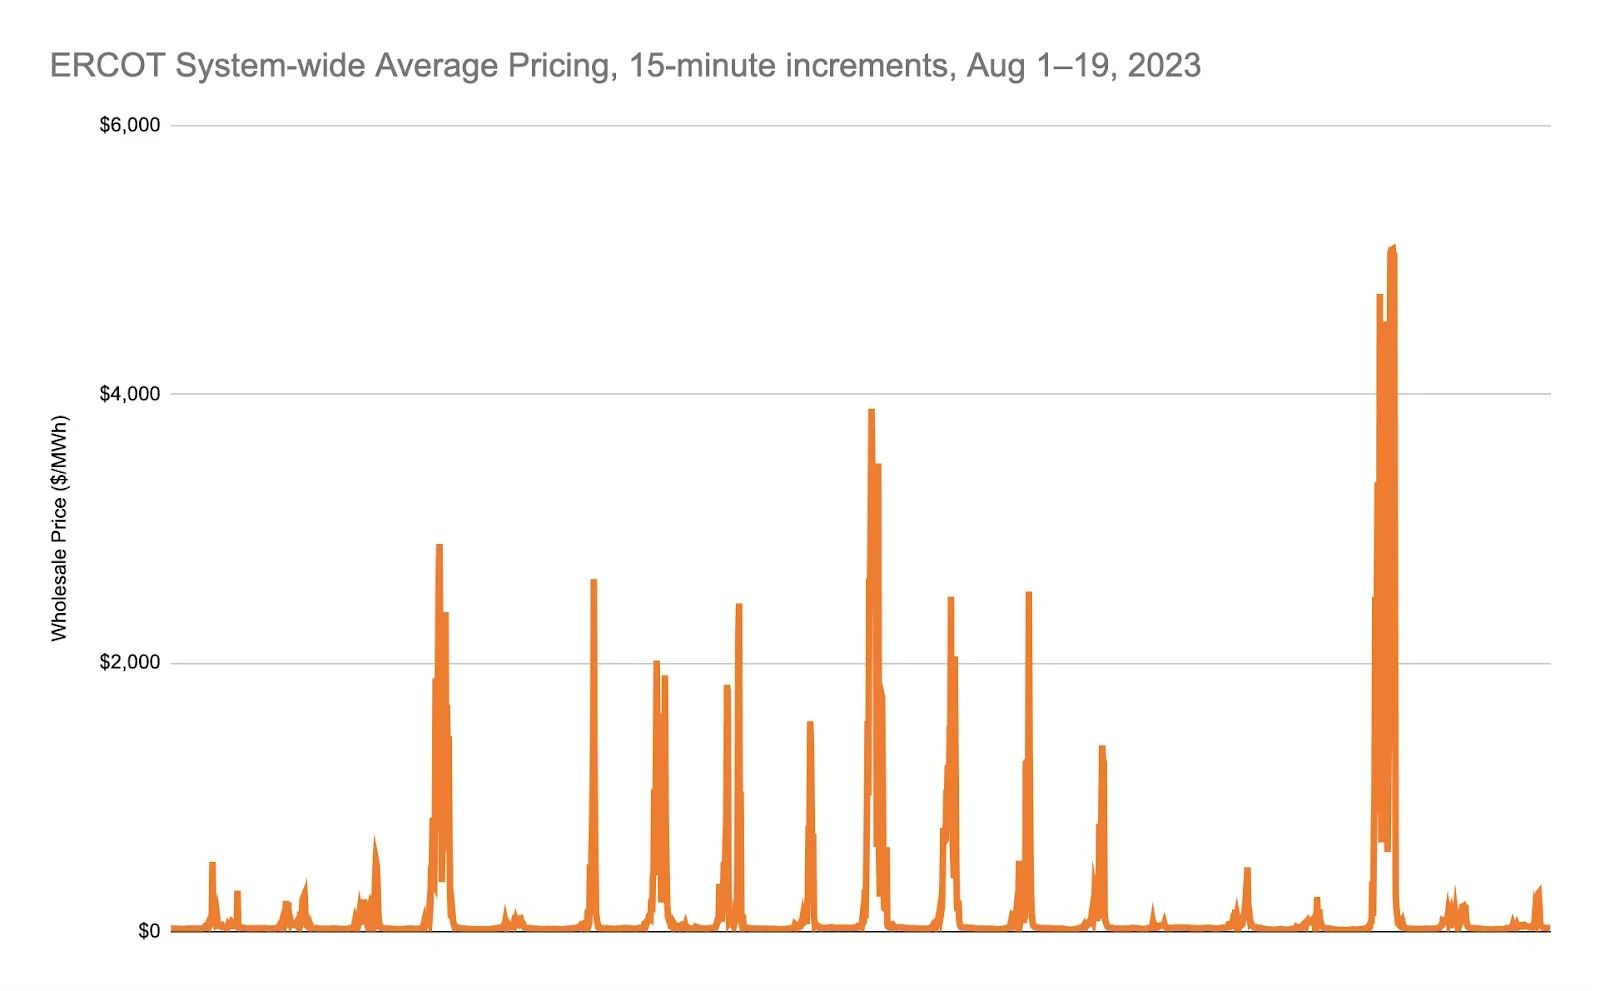 ERCOT System-wide Average Pricing, 15-minute increments, Aug 1-19, 2023